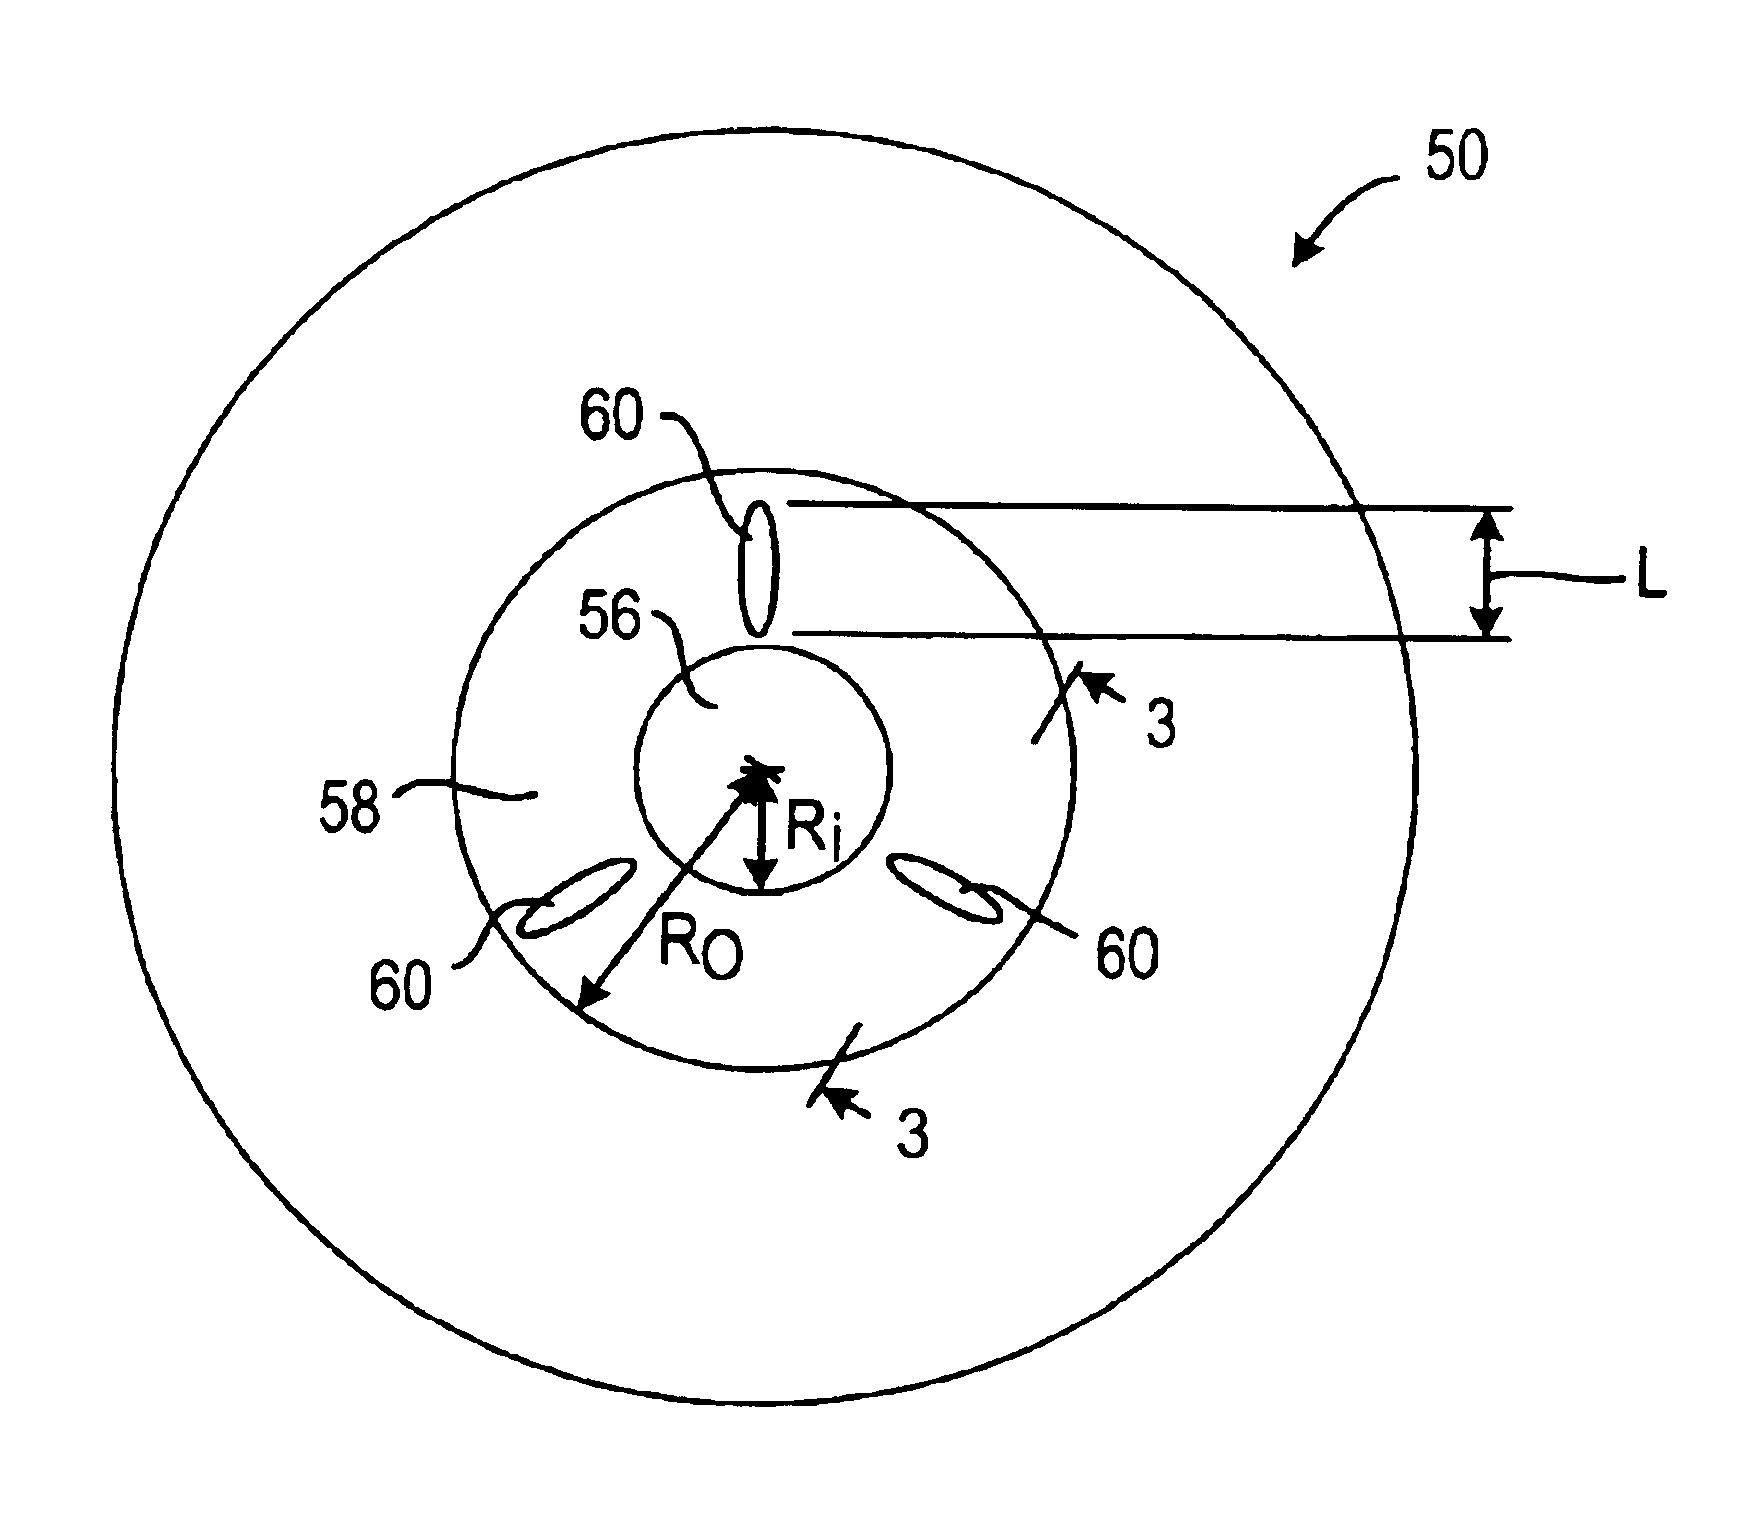 Methods and apparatus for reducing the shrinkage of an optical disc's clamp area and the resulting optical disc